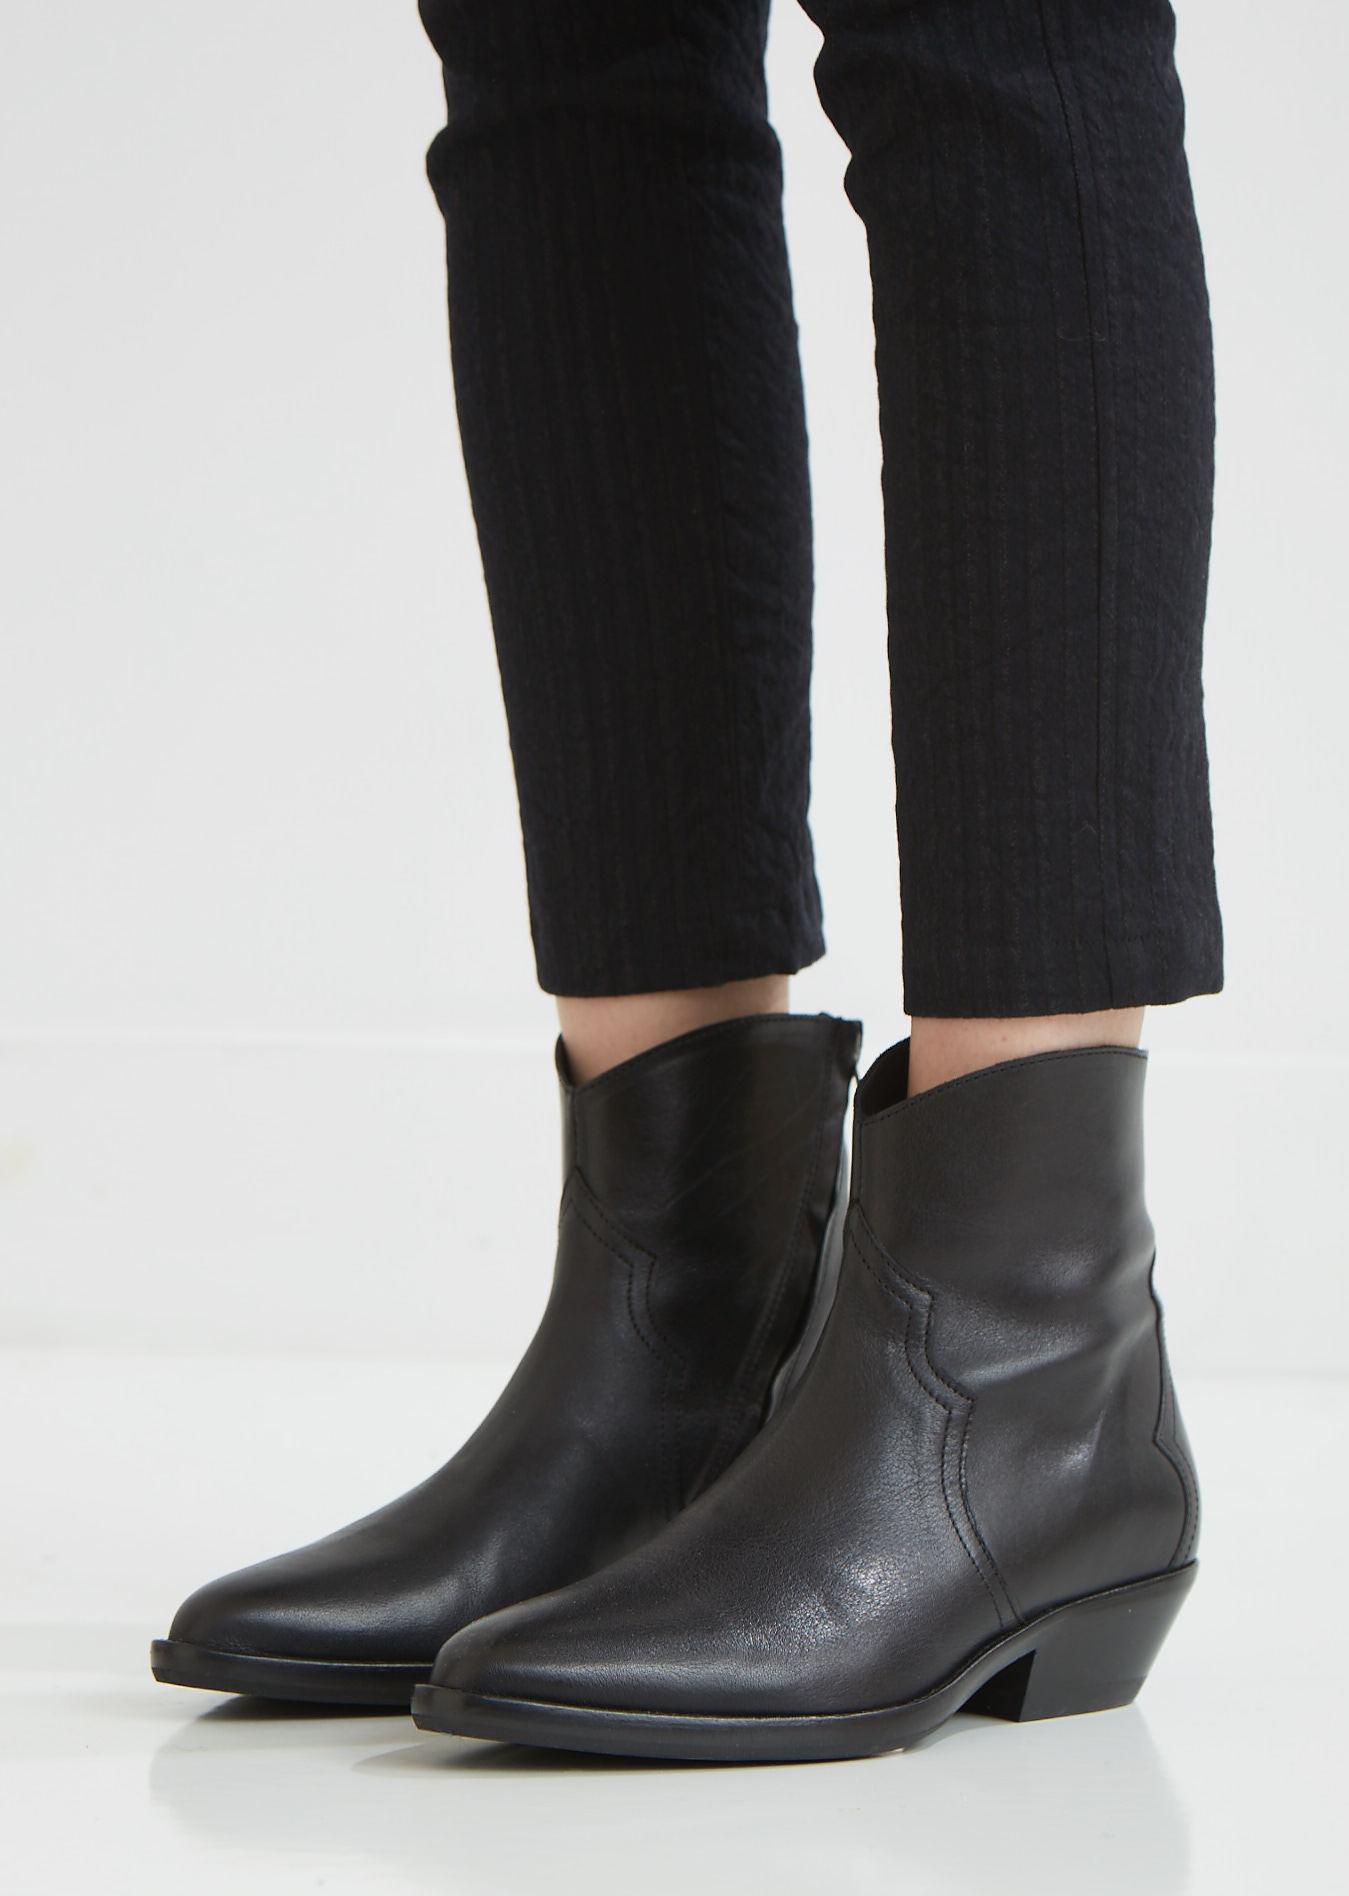 Isabel Marant Dantsee Leather Ankle Boots in Black - Lyst